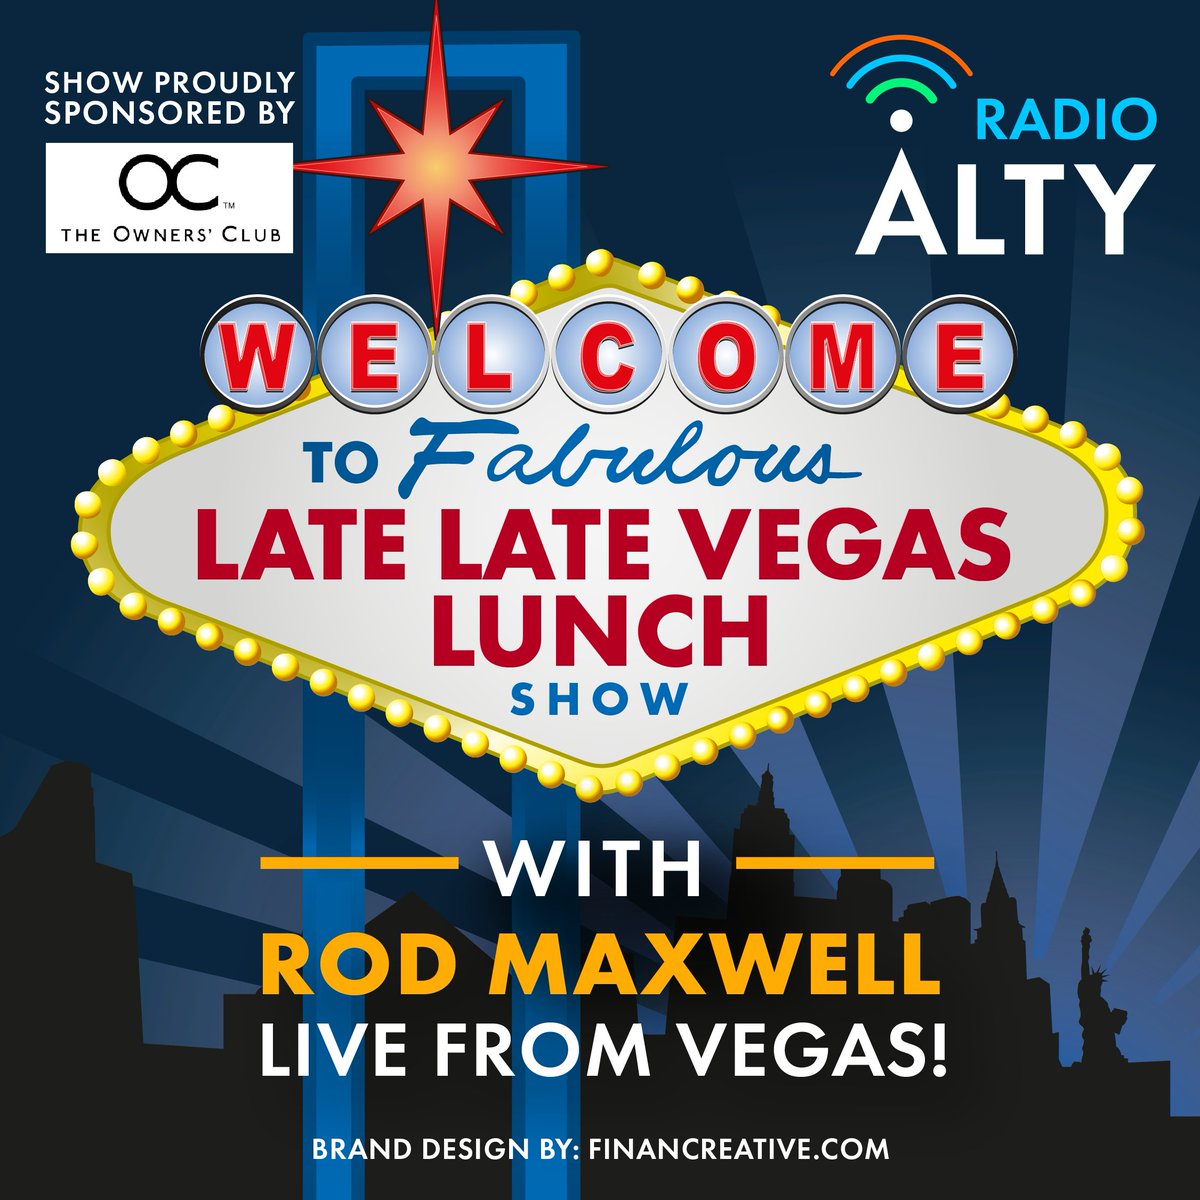 This Friday #theLateLateLunchshow is coming live from Vegas ahead of U2 at The Sphere. Join Rod Maxwell for #theLateLateVEGASLunchshow live 2pm - supported by The Owners' Club - theownersclub.uk. Show graphics and brand design kindly provided by FinanCreative.com